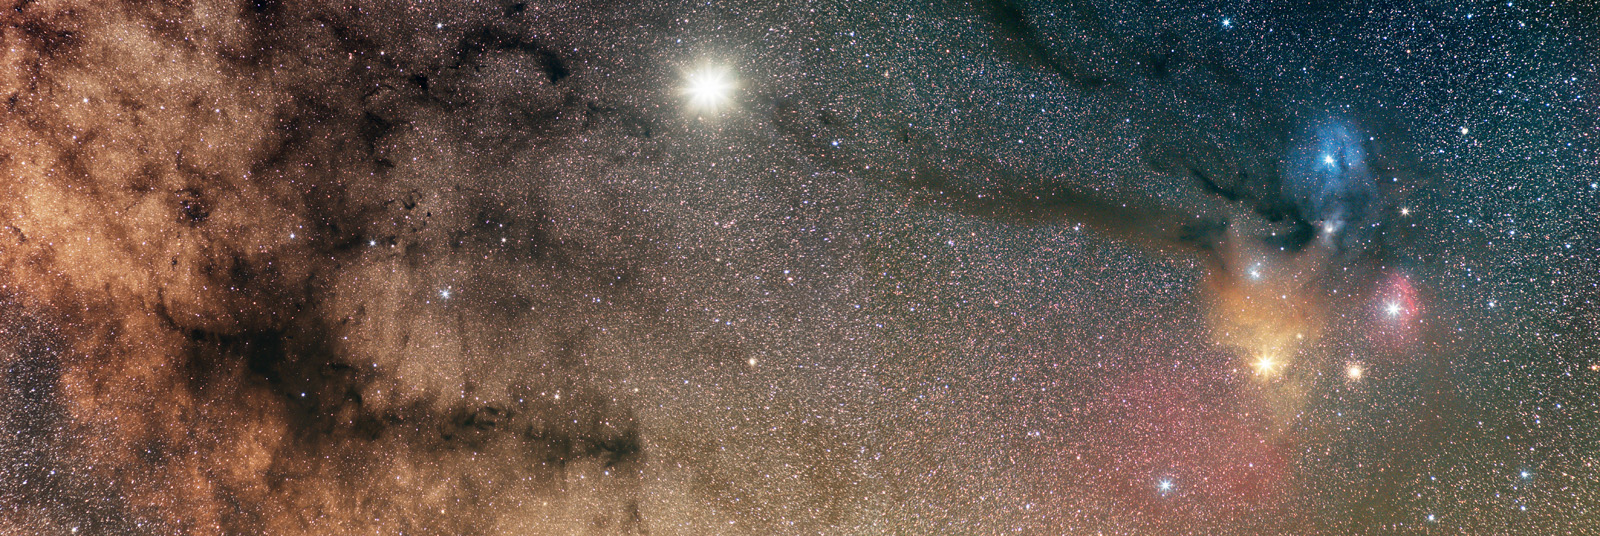 Pipe Nebula to Rho Ophiuchus Complex with Jupiter